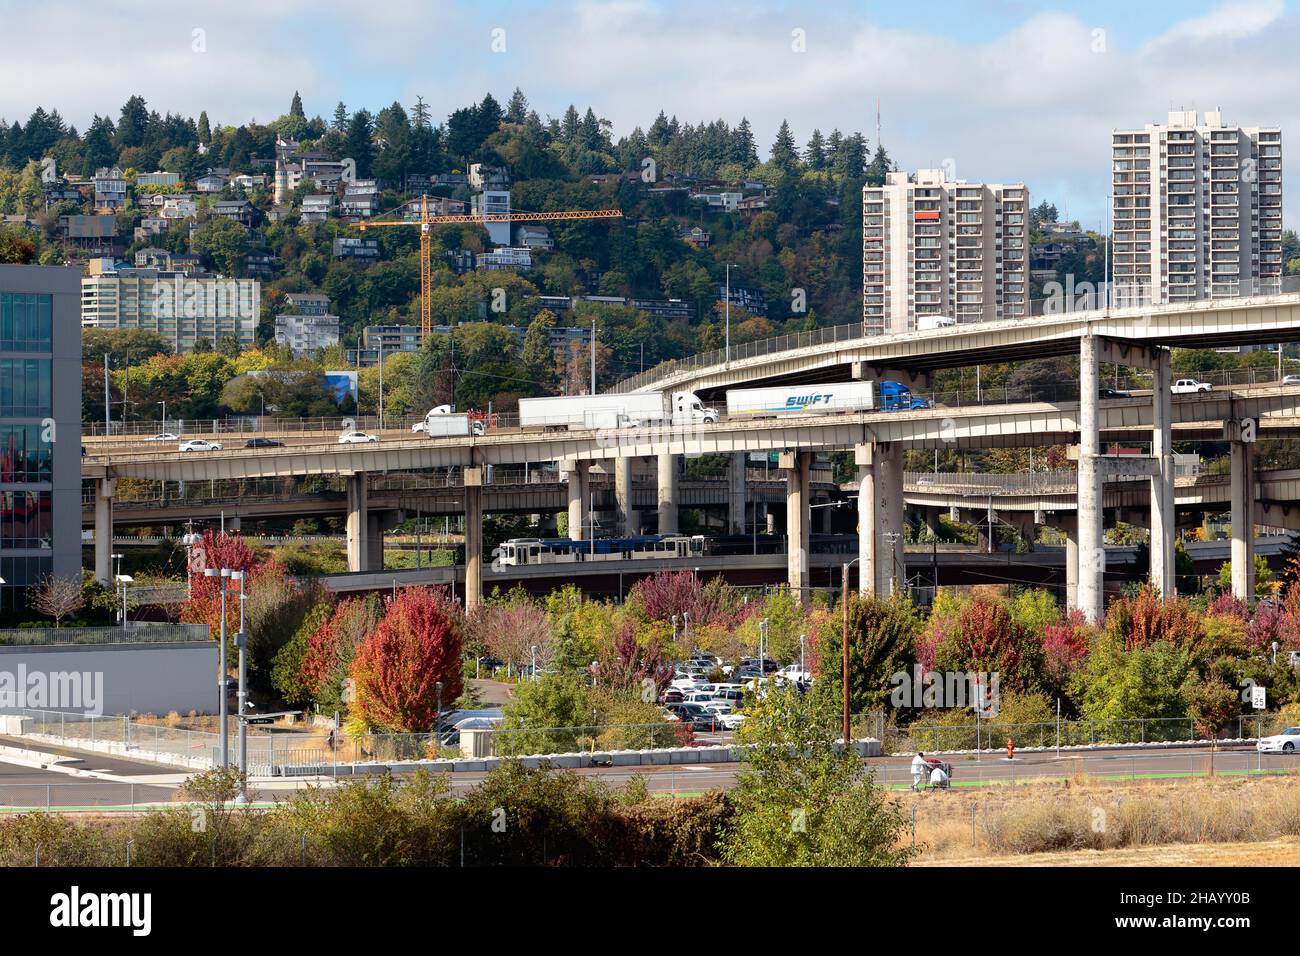 I-5 and 1-405 interchange in Portland, Oregon. Interstate 5 and interstate 405 highway interchange viaduct with Goose Hollow as backdrop. Stock Photo